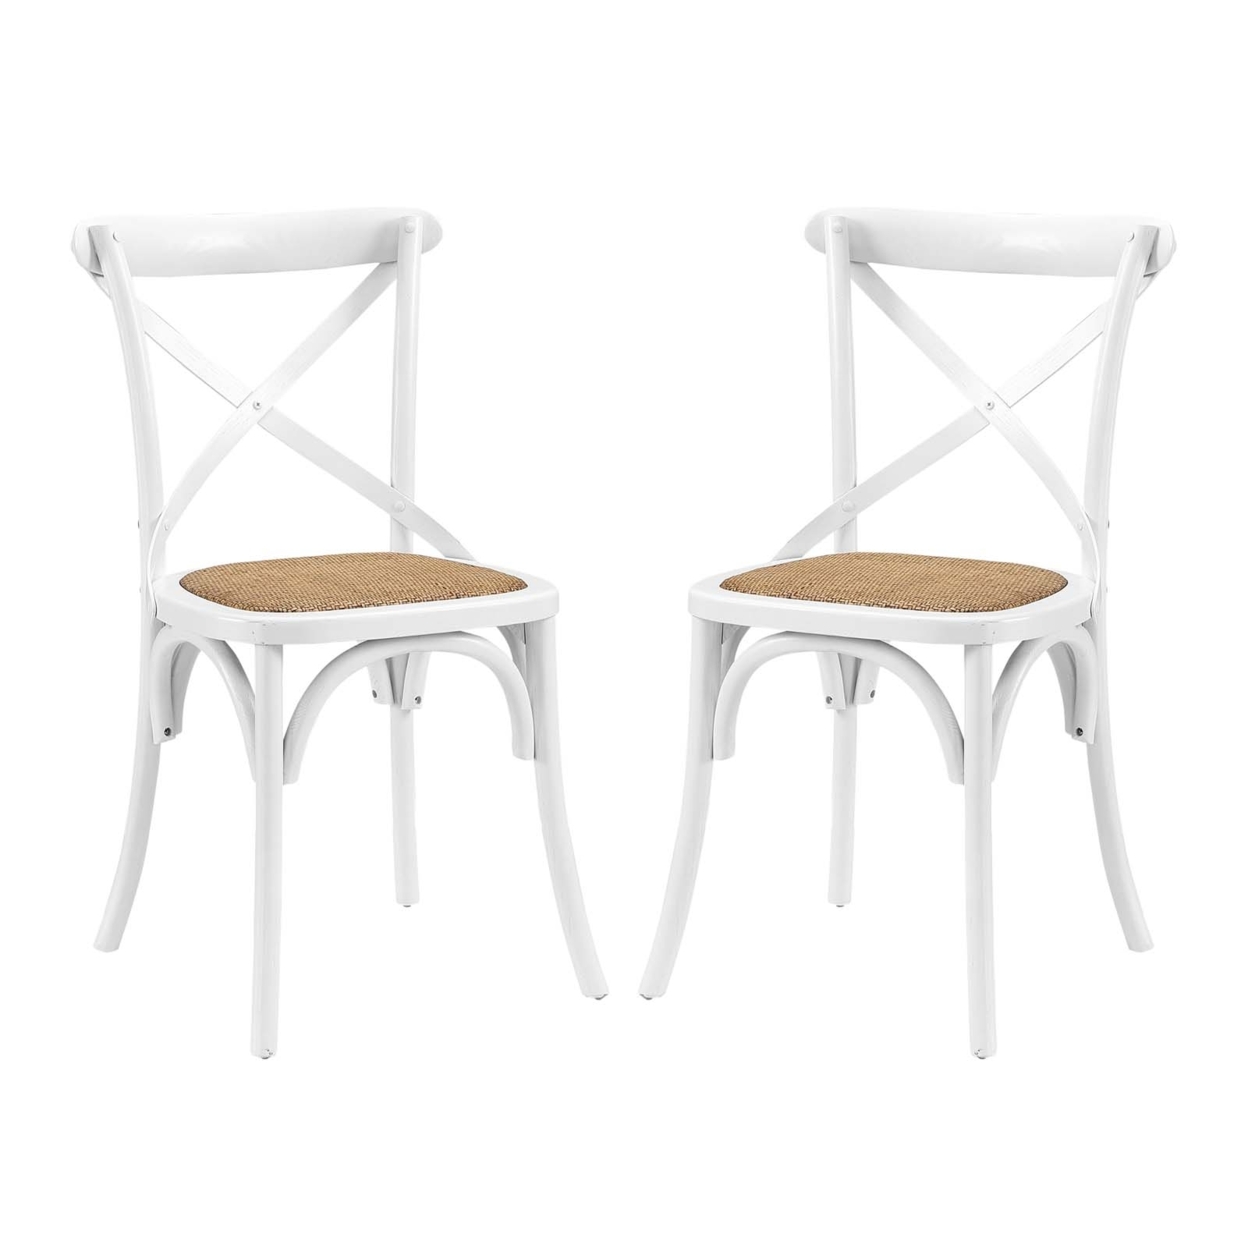 Gear Dining Side Chair Set Of 2,White